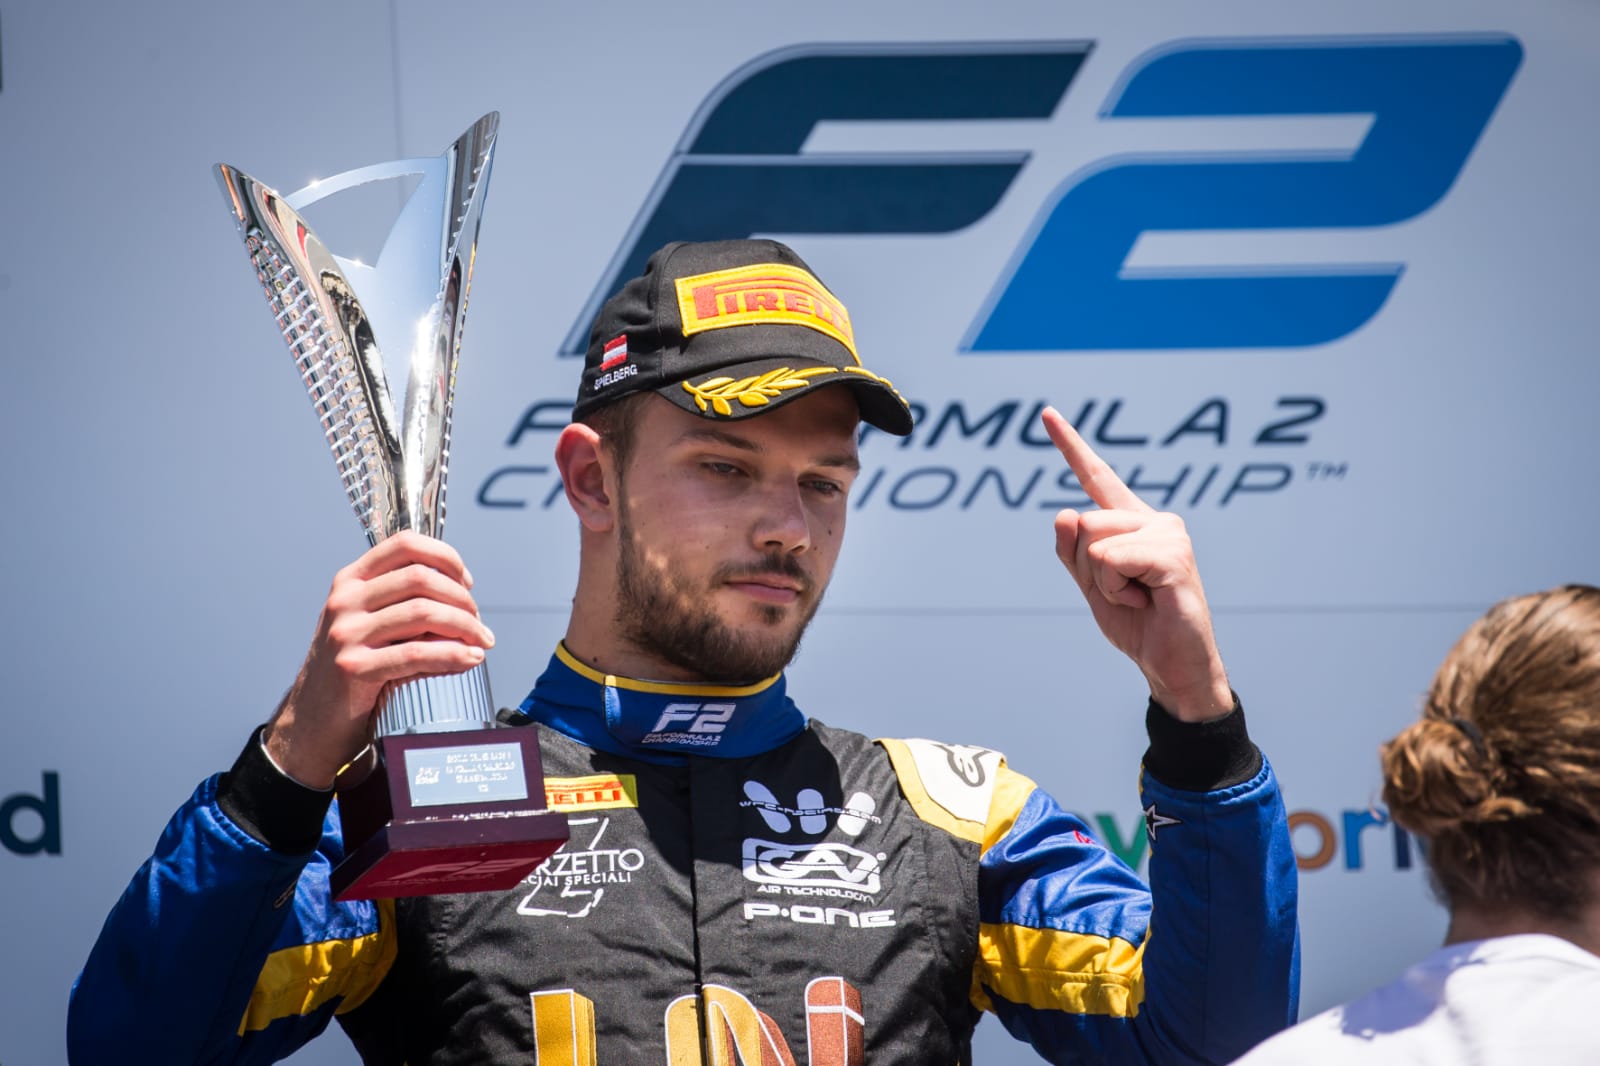 Double podium for Ghiotto